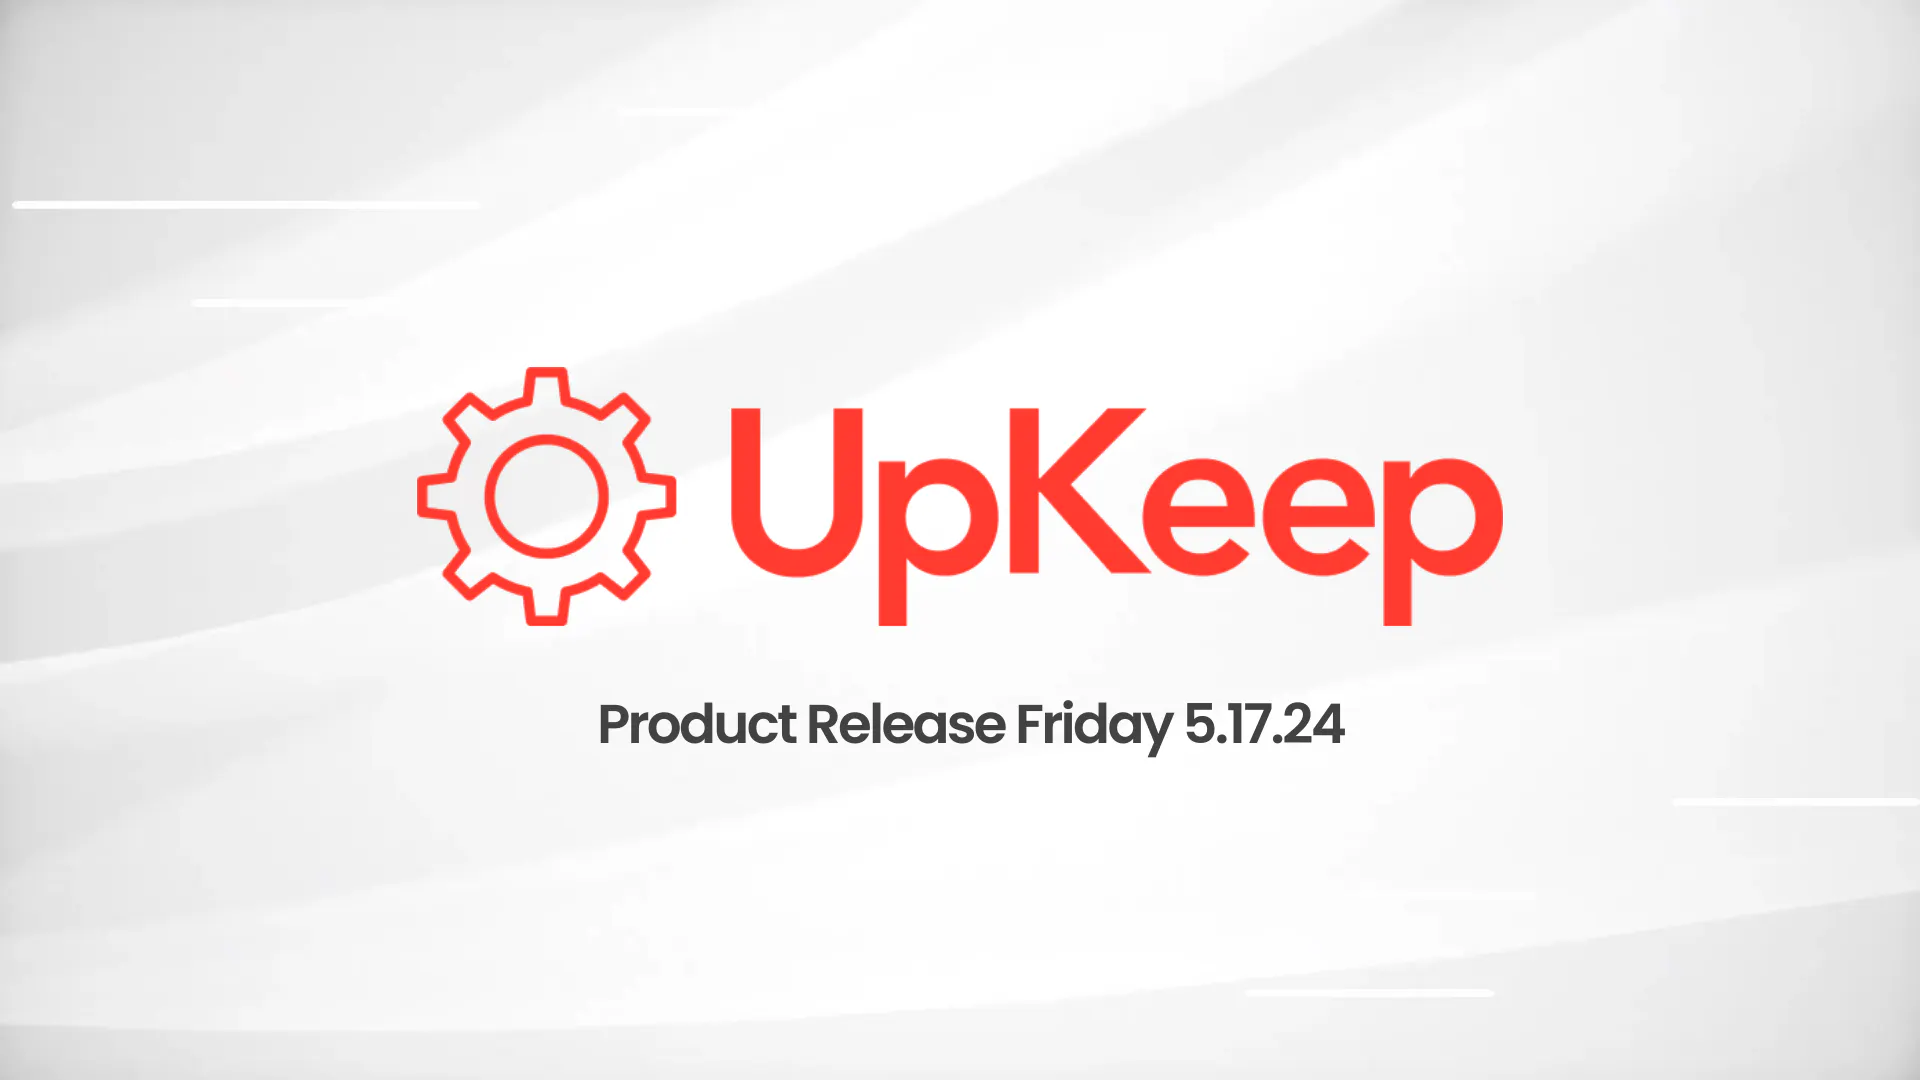 UpKeep Product Release: New UI, API Enhancements, and Cycle Count Updates! | Release Friday 5.17.24